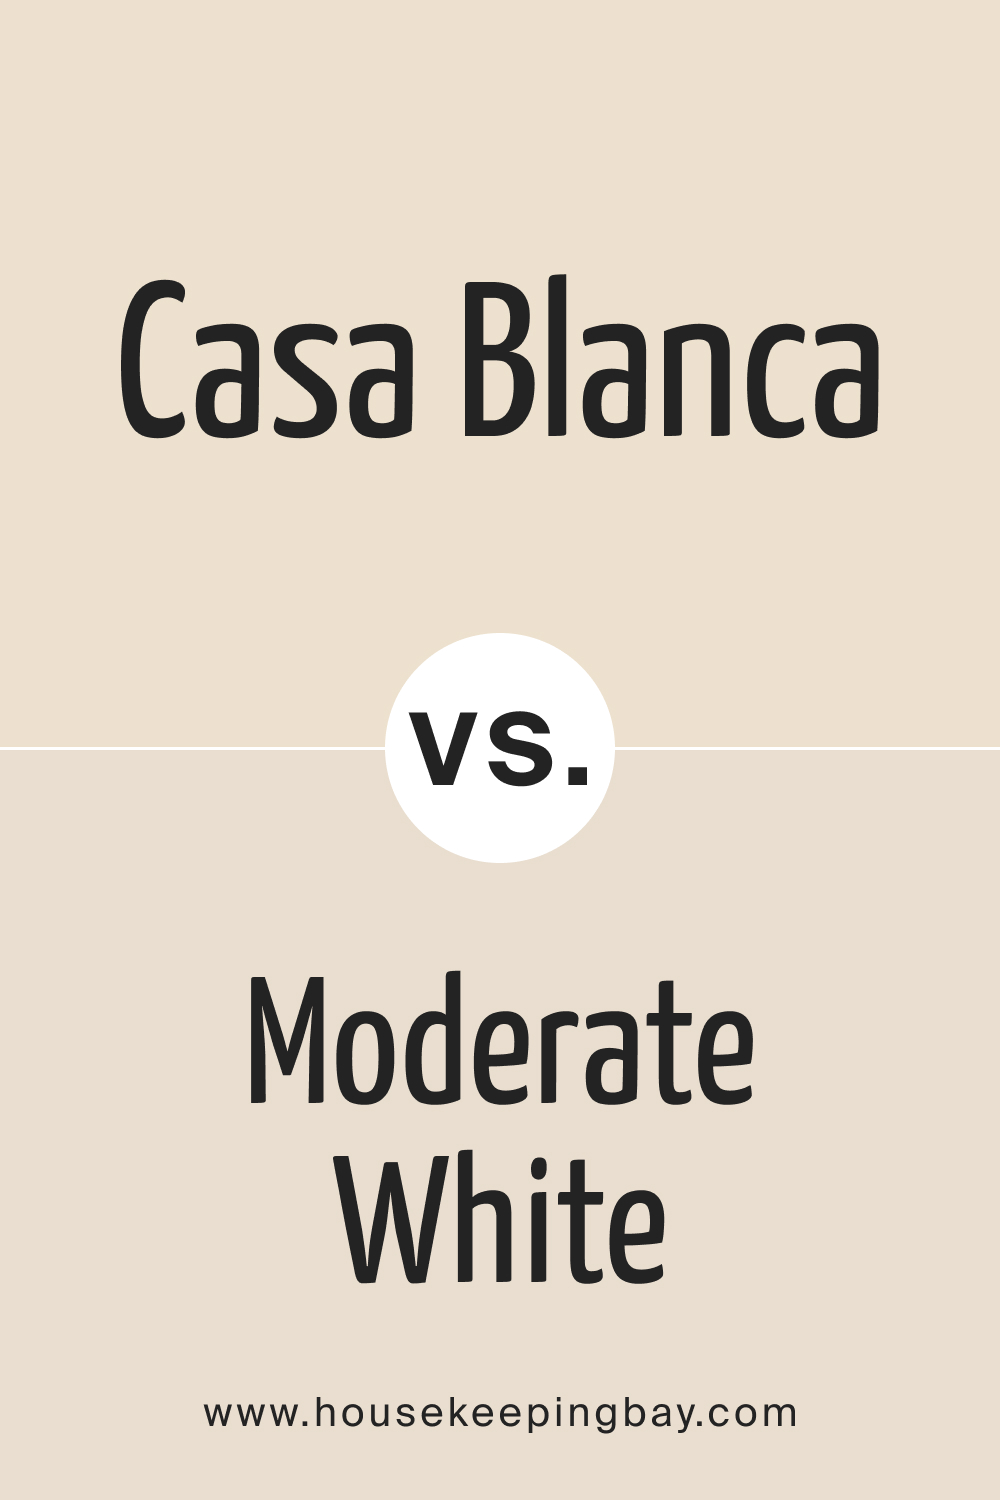 Casa Blanca 7571 Paint Color by Sherwin Williams VS Moderate White